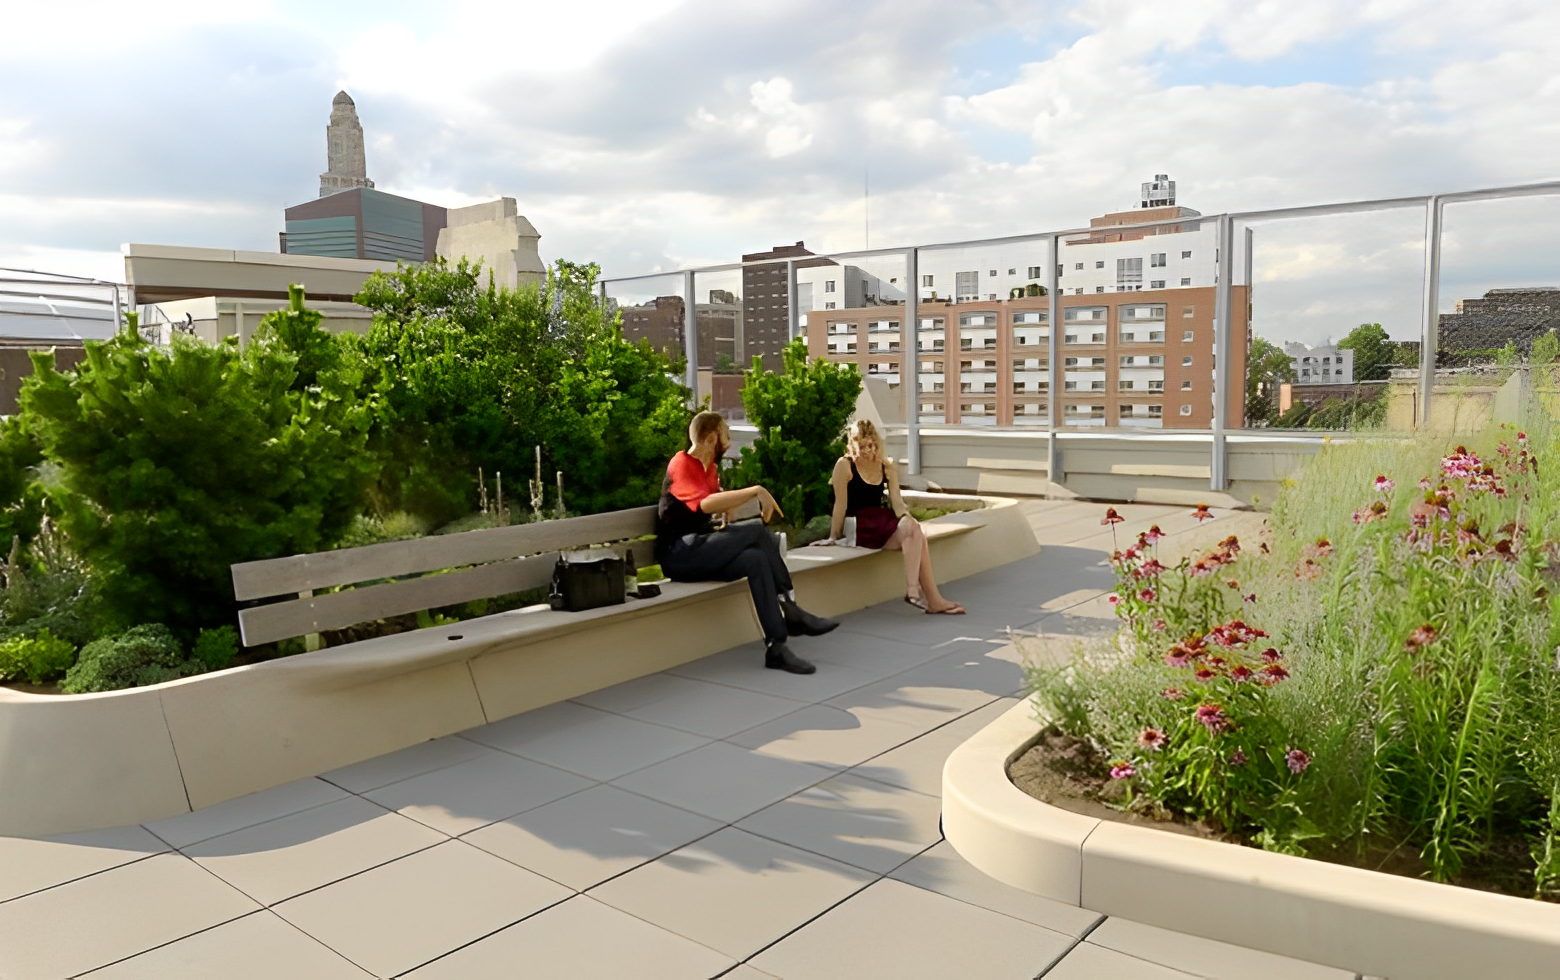 people enjoying green roof with flowers, plants, and benches